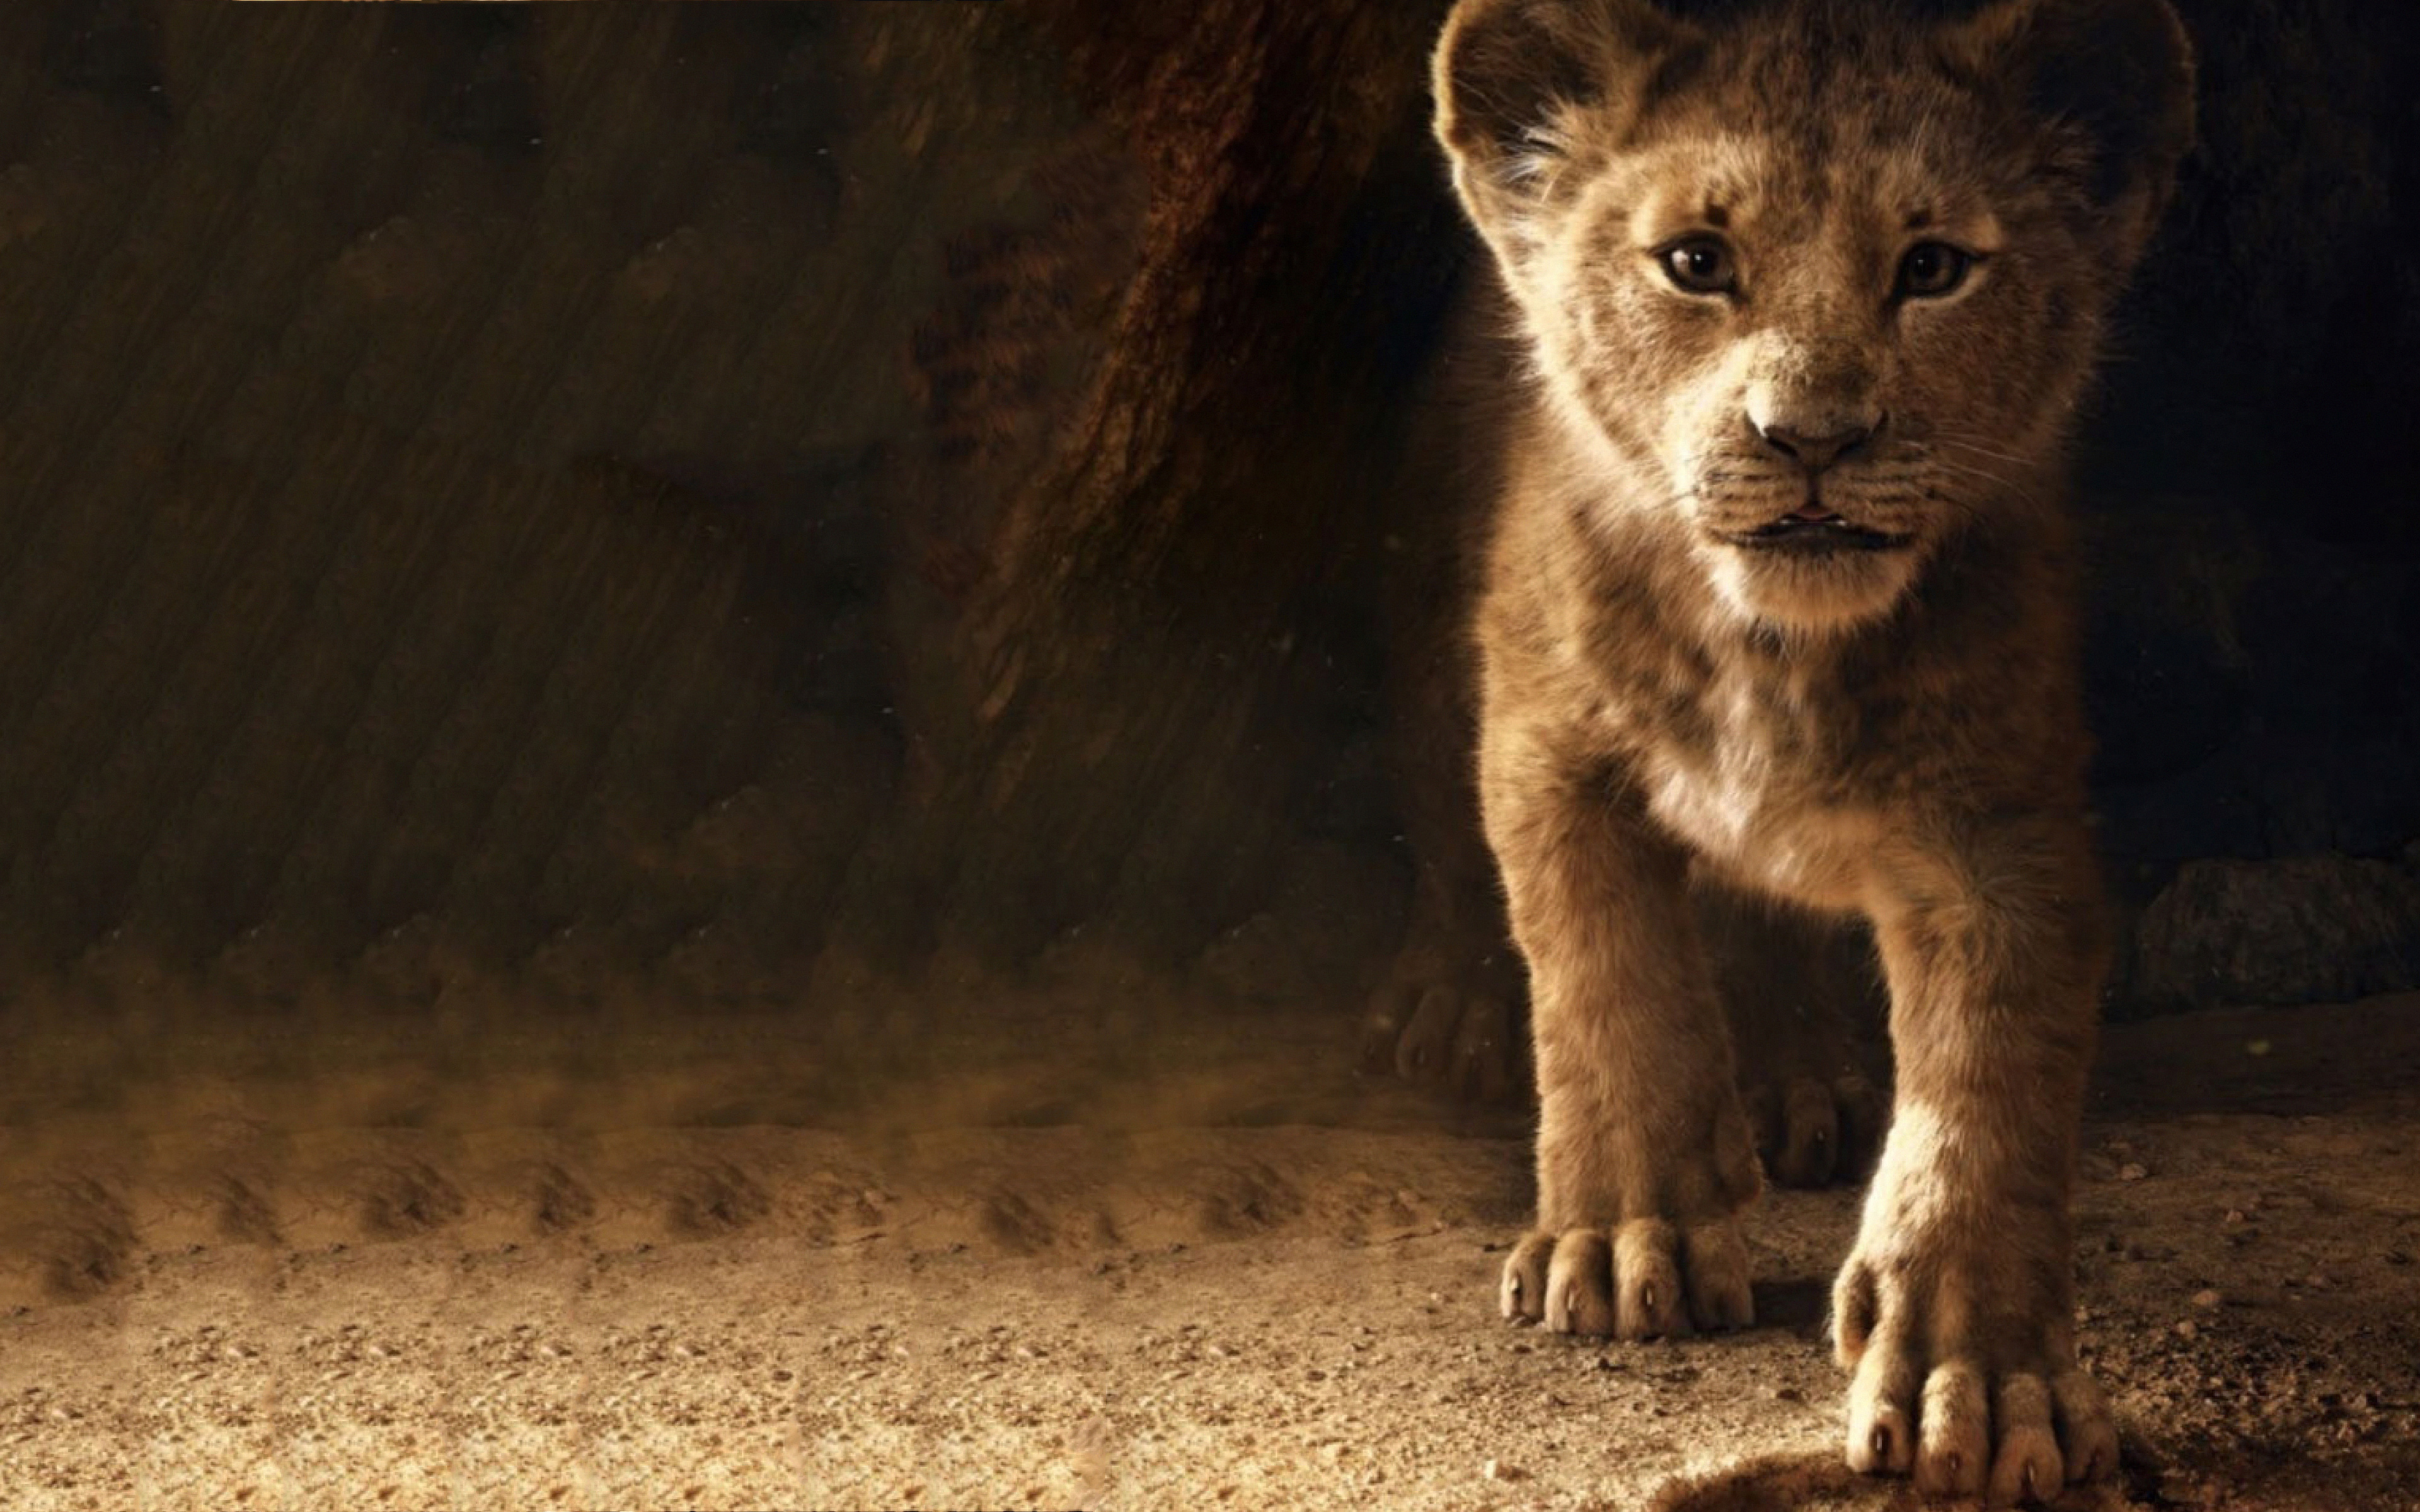 The Lion King Simba 2019 4k In 3840x2400 Resolution. the-lion-k...